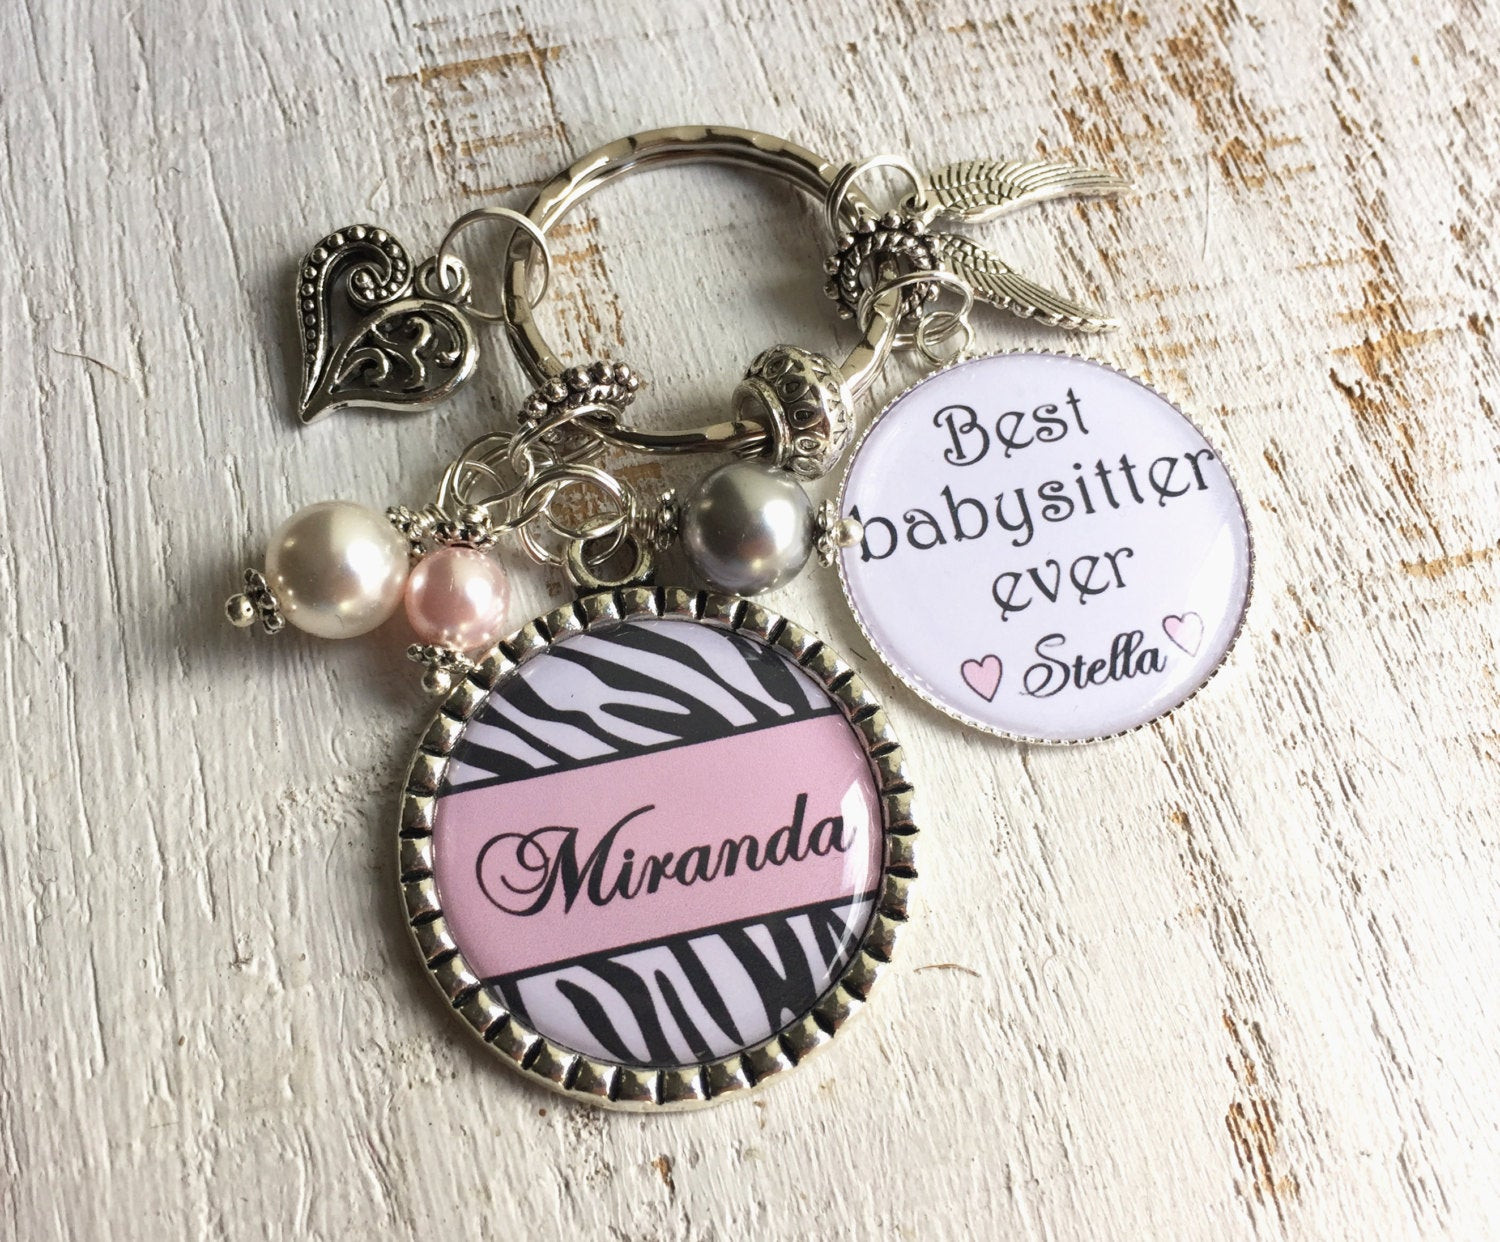 Christmas Gift Ideas For Babysitters
 Babysitter Gift Nanny Gift Ideas PERSONALIZED Keychain or